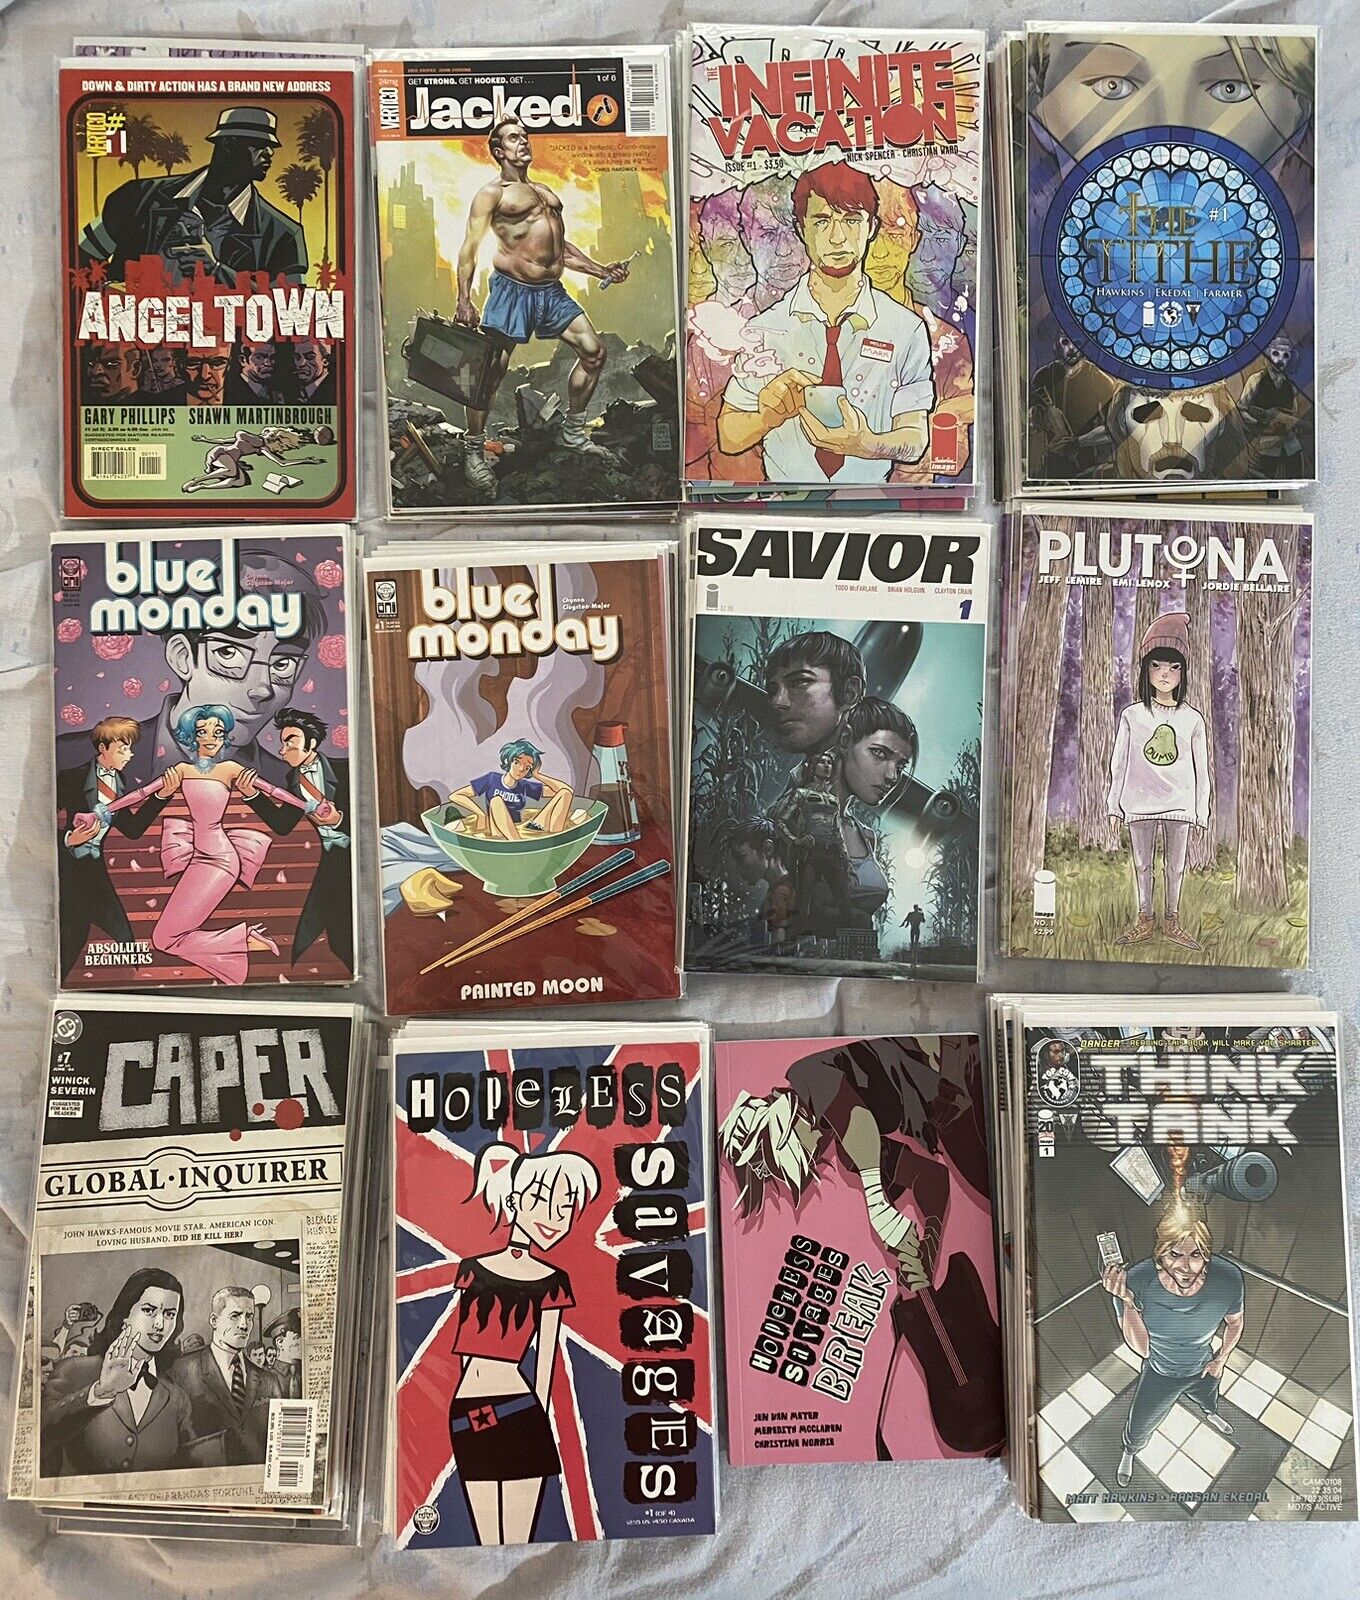 HUGE 80-Book Indie Comic Lot (Blue Monday, Think Tank, Jacked, Tithe, Caper..)